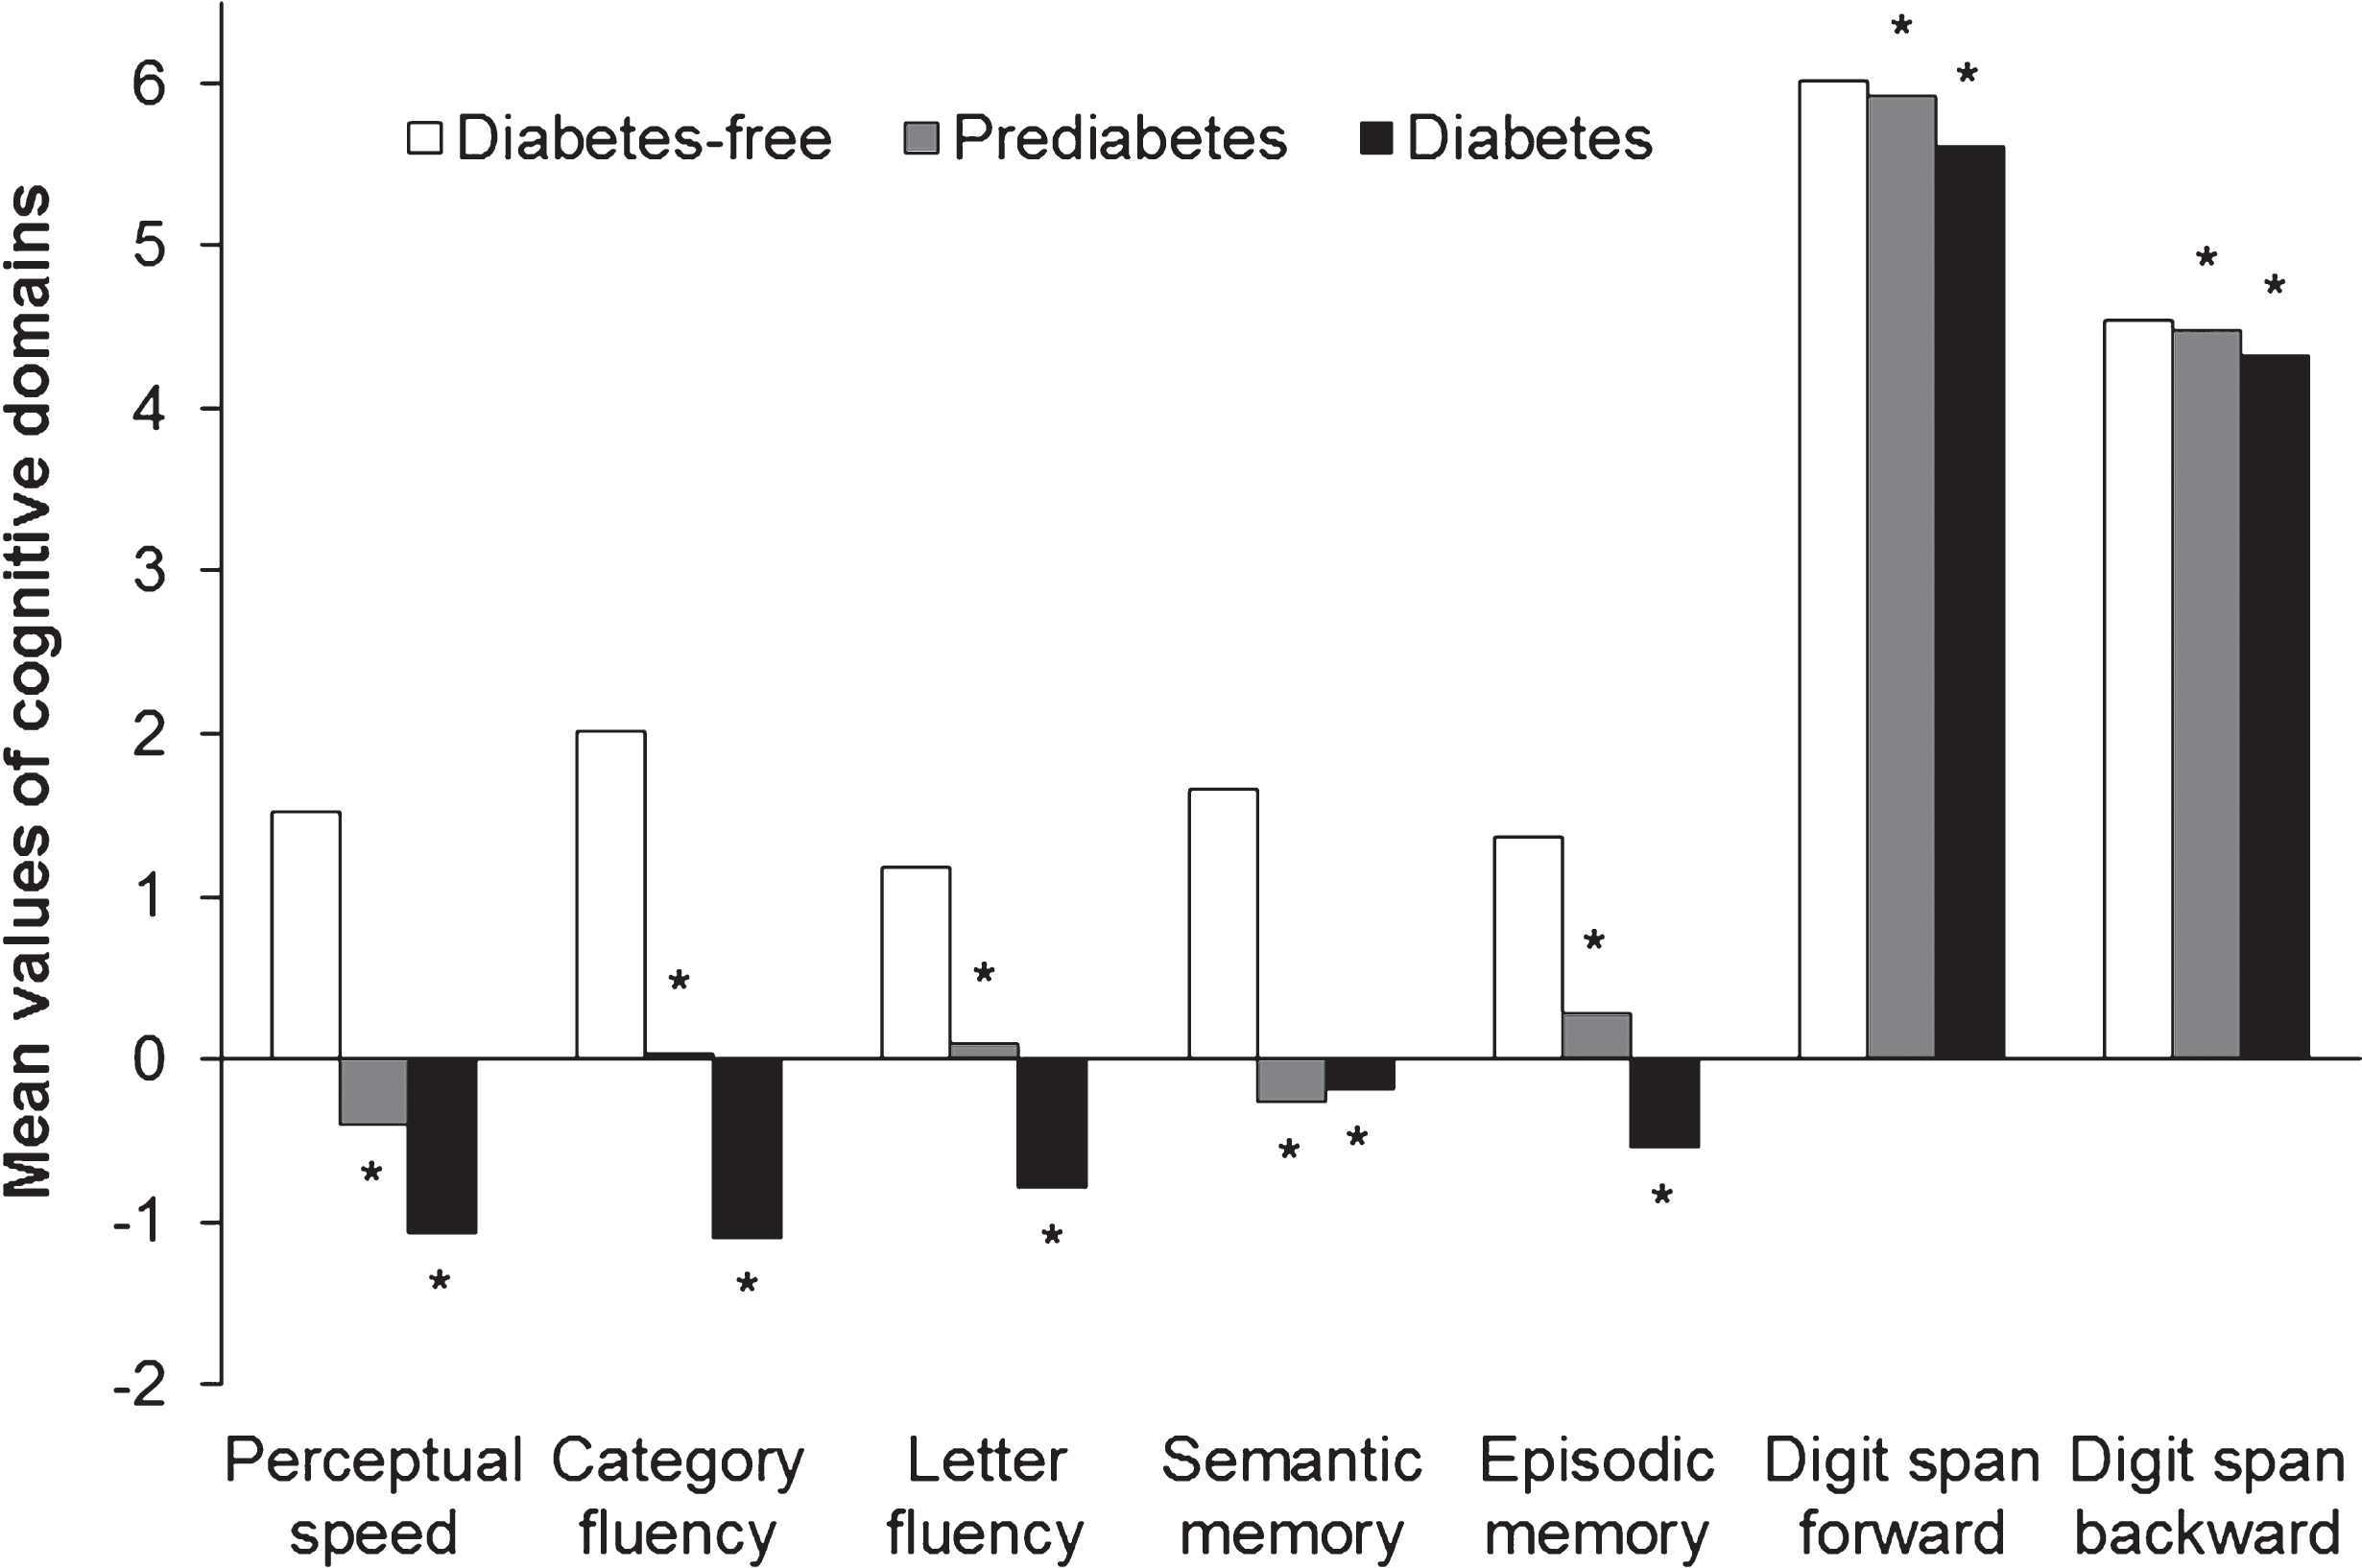 Cognitive characteristics of the study sample by diabetes. Pairwise multiple comparisons: *p<0.05 (reference group included diabetes-free participants). All latent factor scores were multiplied by 100. Missing data: 48 for perceptual speed, 8 for category fluency, 11 for letter fluency, 6 for semantic memory, 20 for episodic memory, 57 for digit span forward, and 62 for digit span backward.